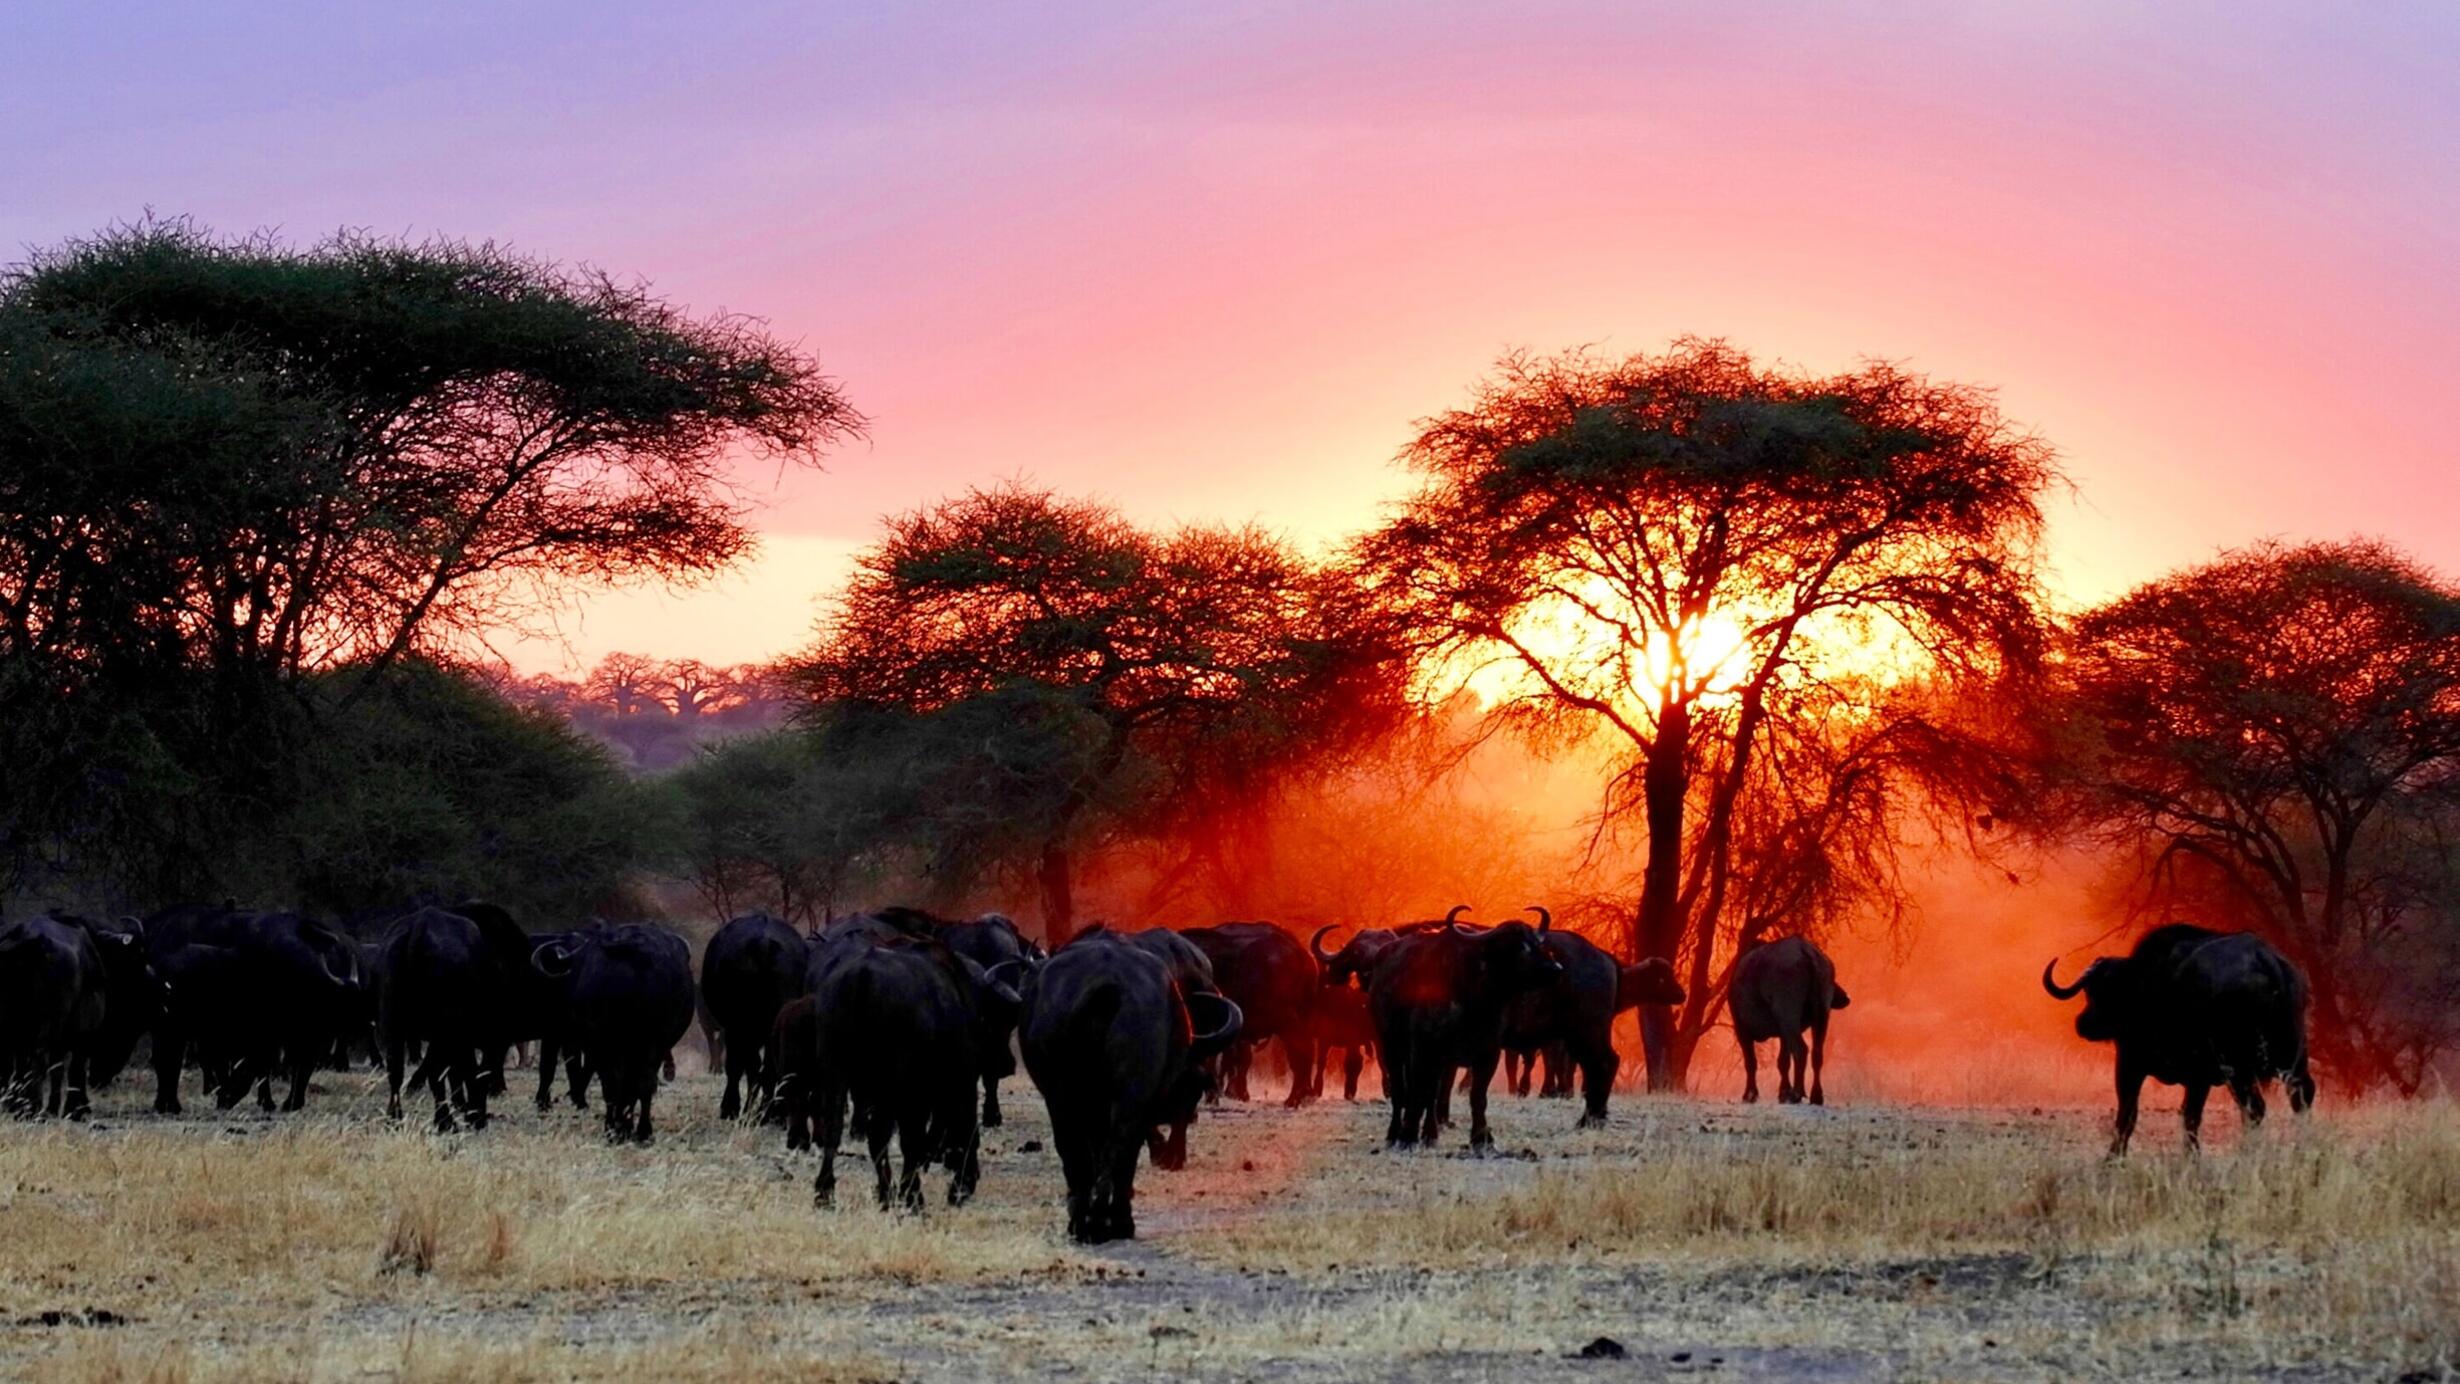 A herd of water buffalo, walking in grass, with evening sunlight filtering through trees in the background.